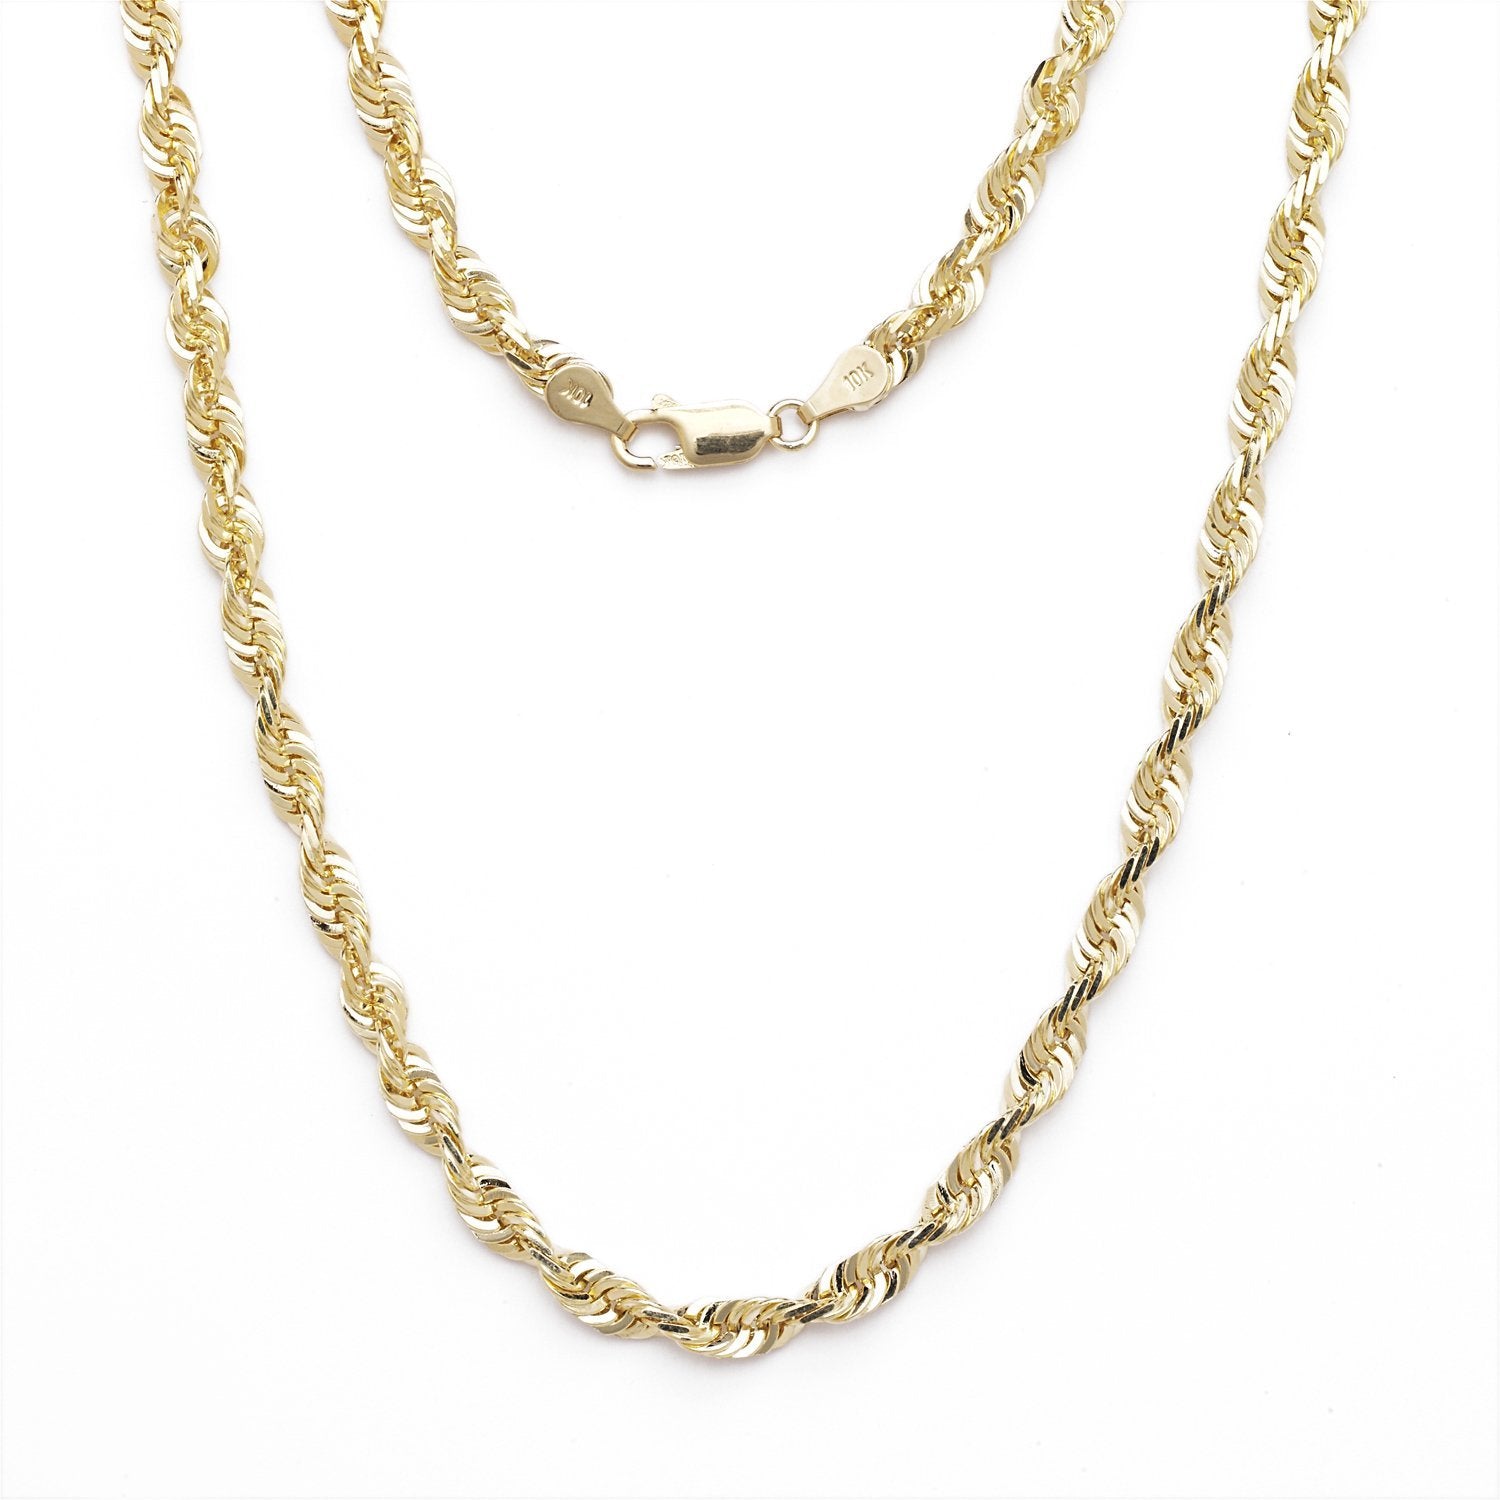 10k Yellow Gold Solid Extra Light Diamond Cut Rope Chain Necklace, 2.75mm